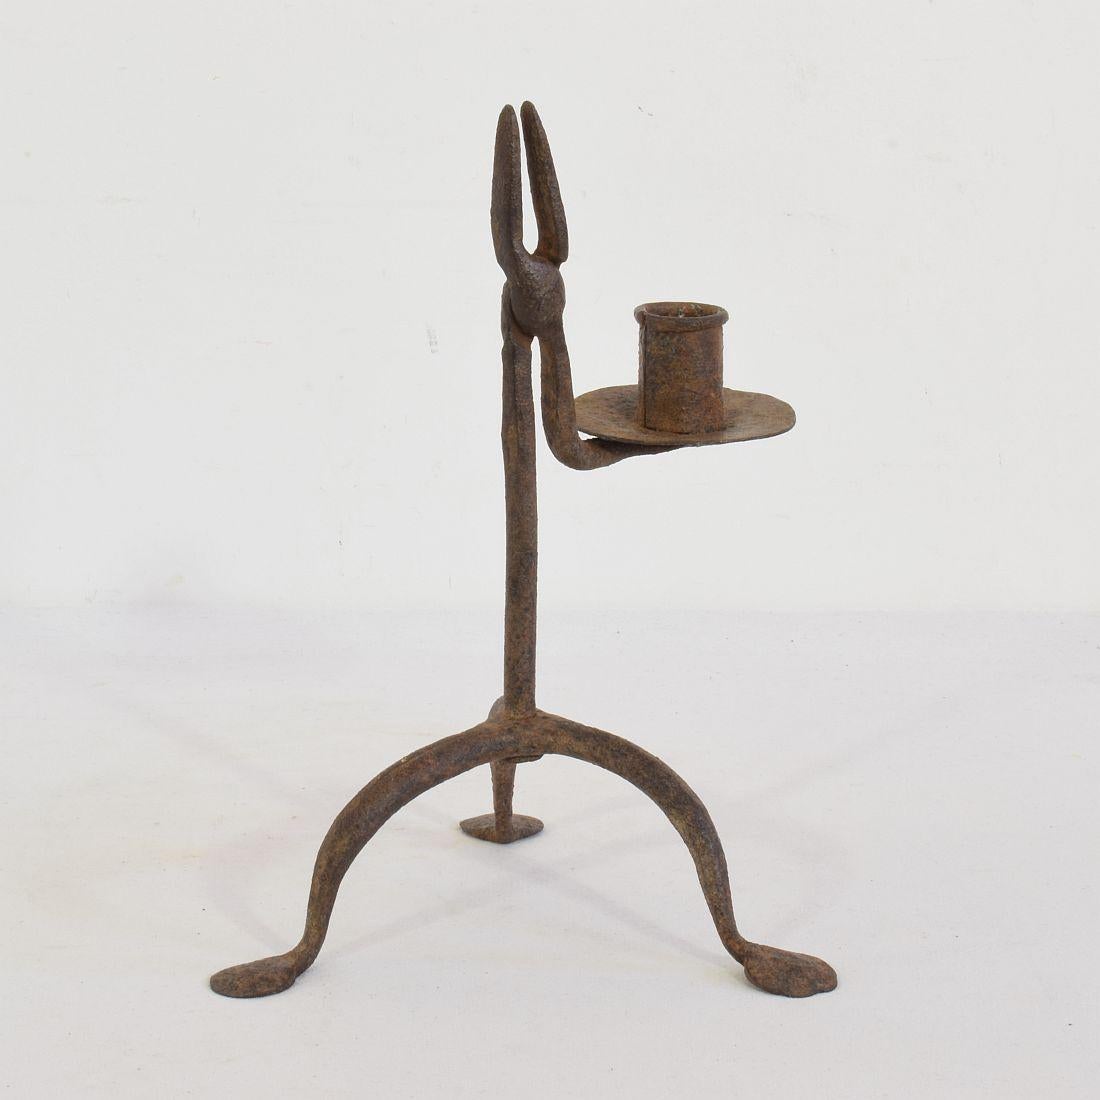 Spanish 18th-19th Century Hand Forged Iron Candleholder